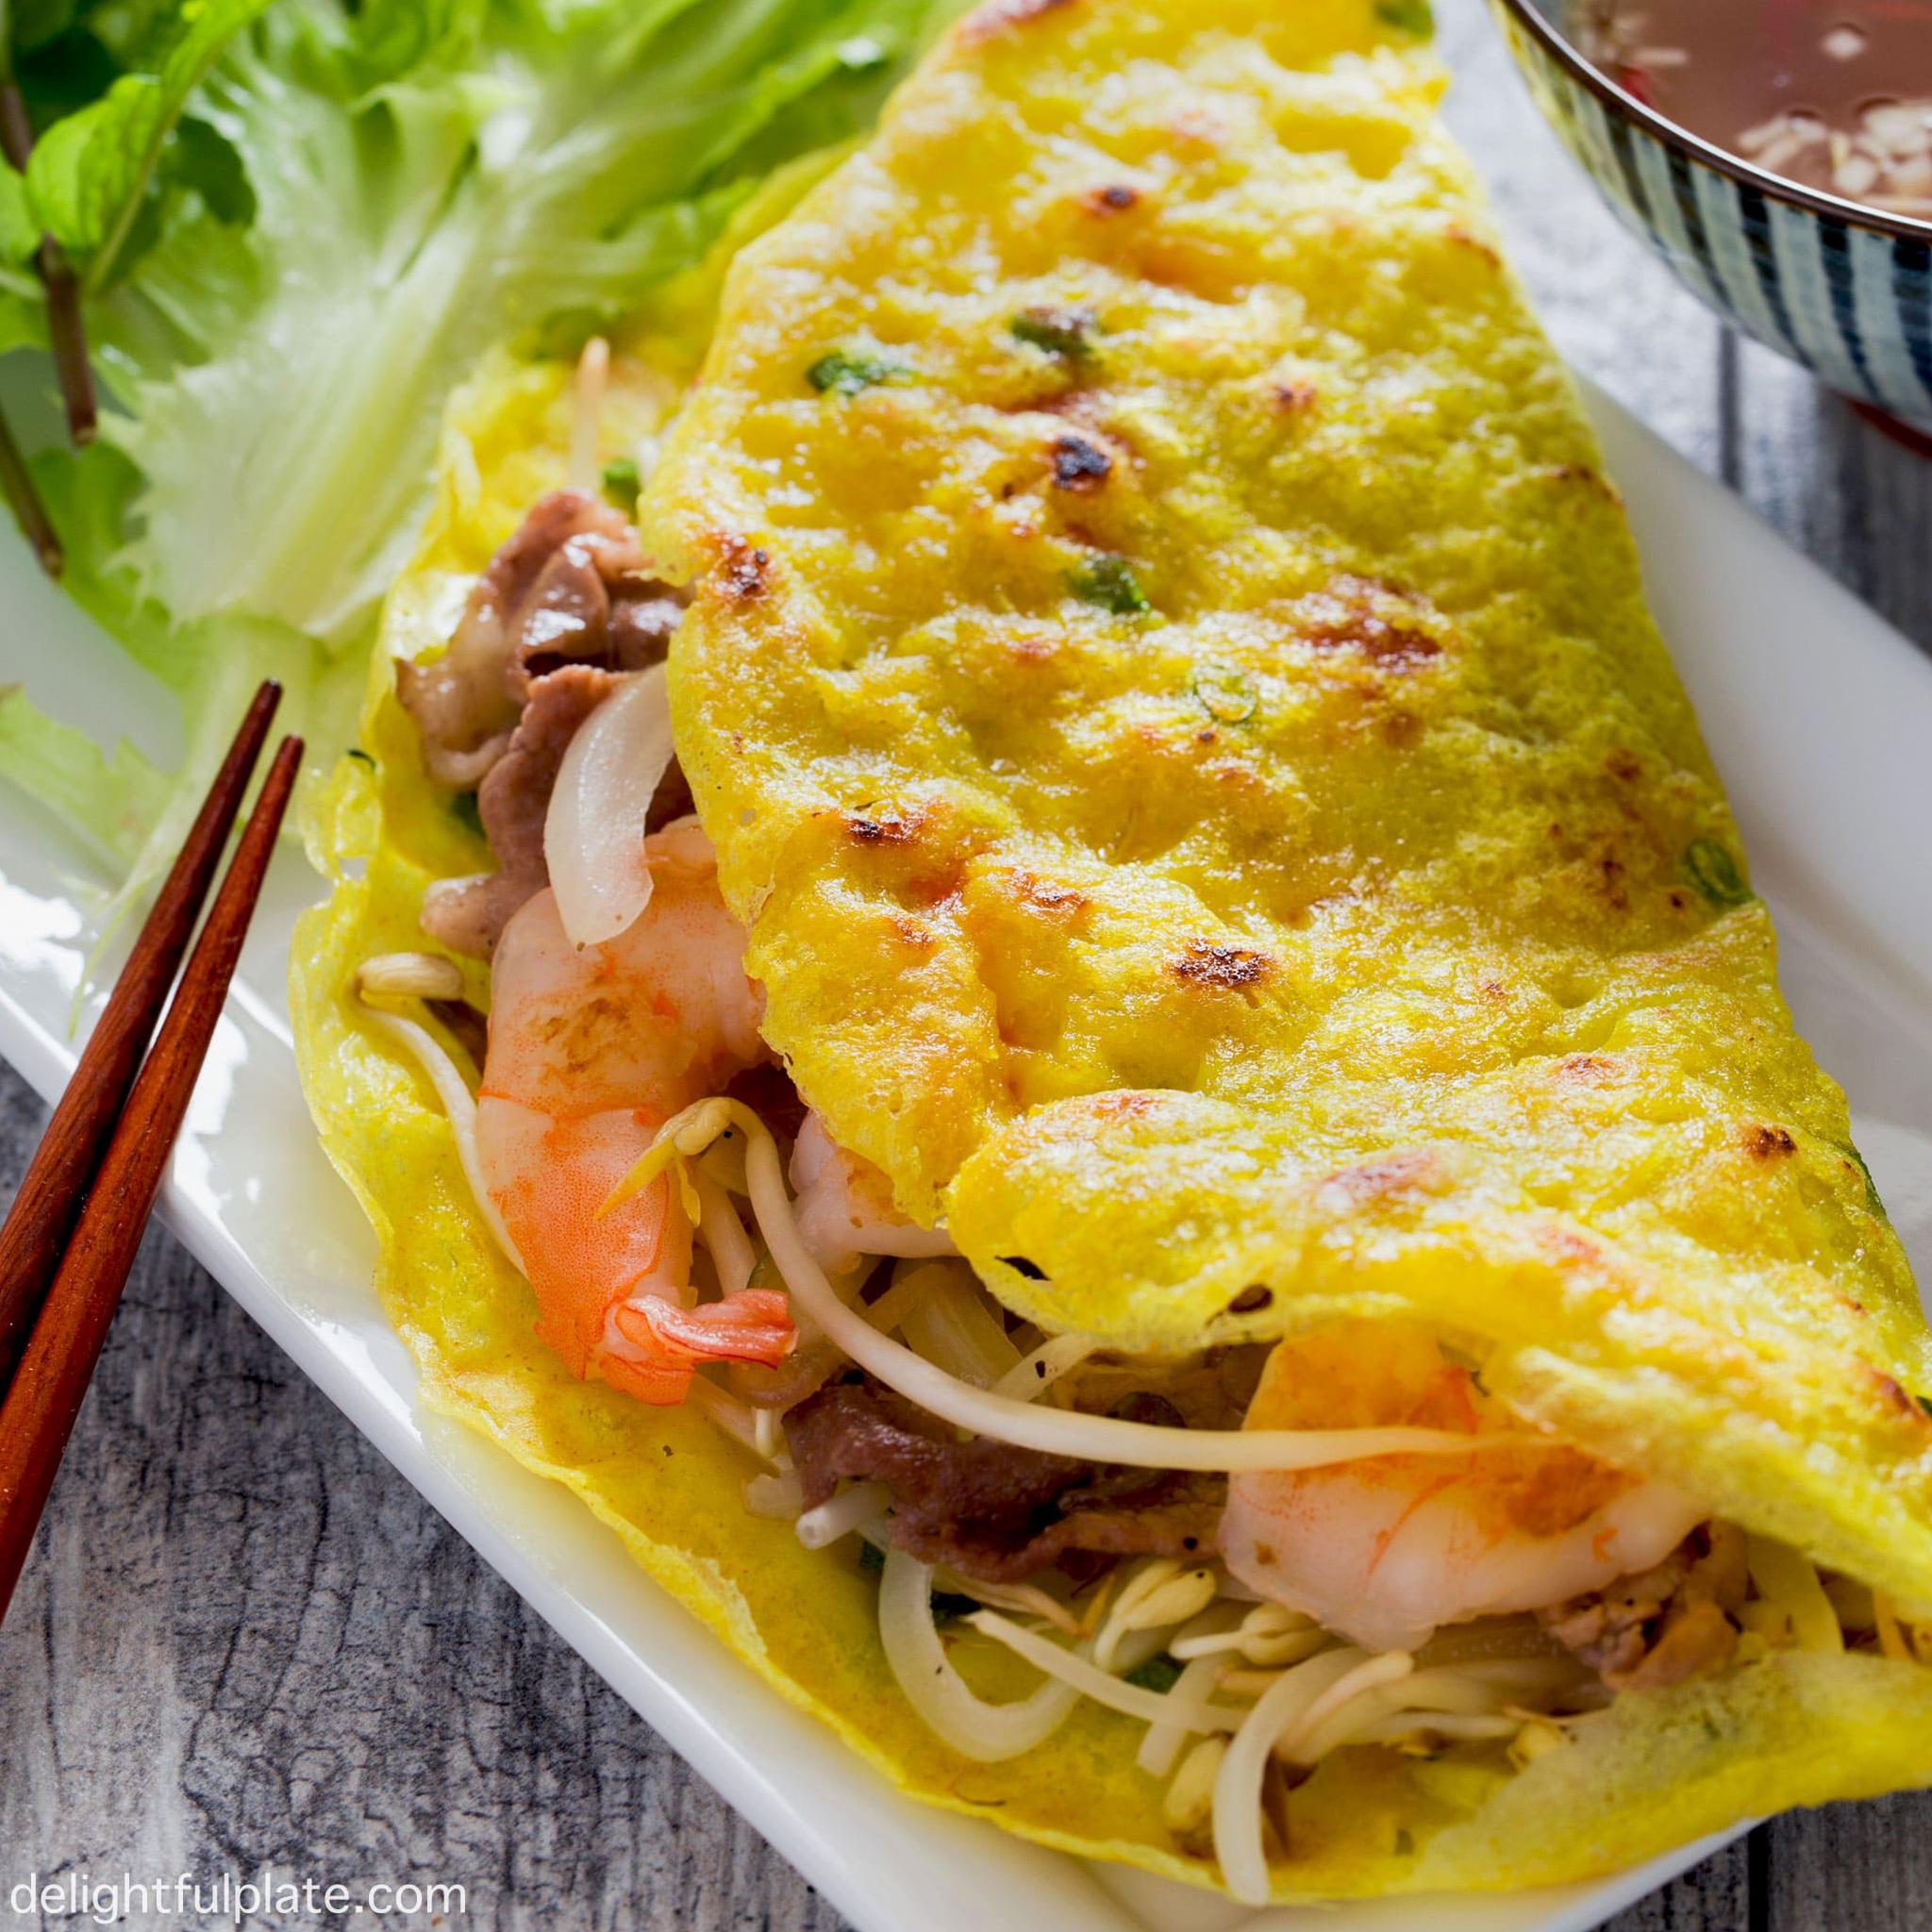  These Vietnamese crepes will transport your taste buds straight to the streets of Ho Chi Minh City.